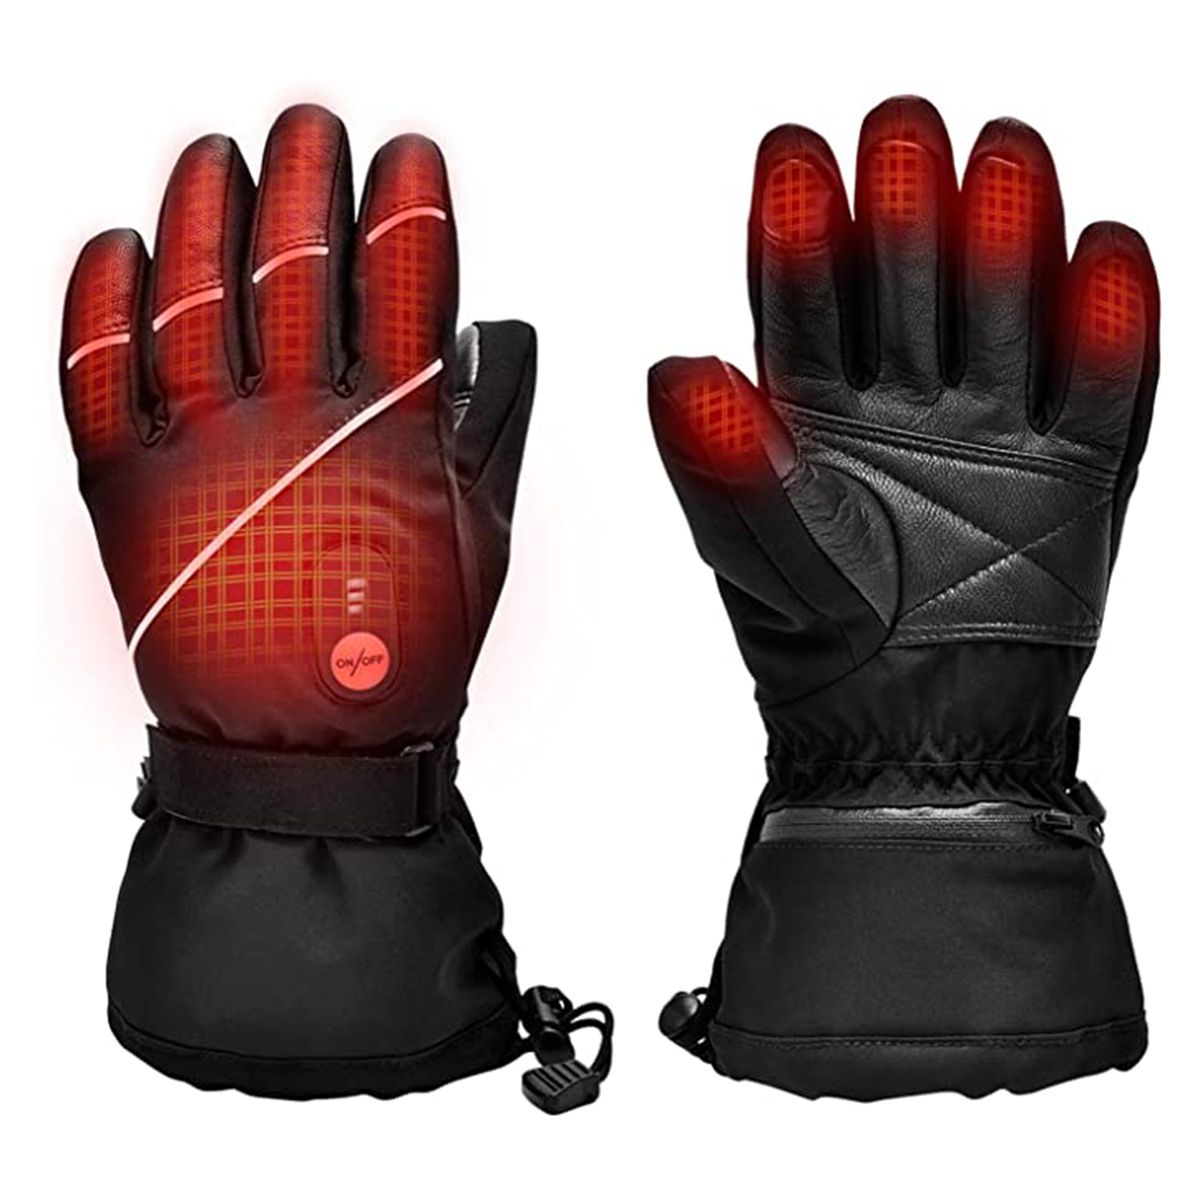 Waterproof Winter Thermal Gloves M.Jone Heated Gloves Warm Touchscreen Gloves for Outdoor Sports Cycling Riding Skiing Skating Hiking Huntin. Battery Powered Electric Heat Gloves for Women and Men 